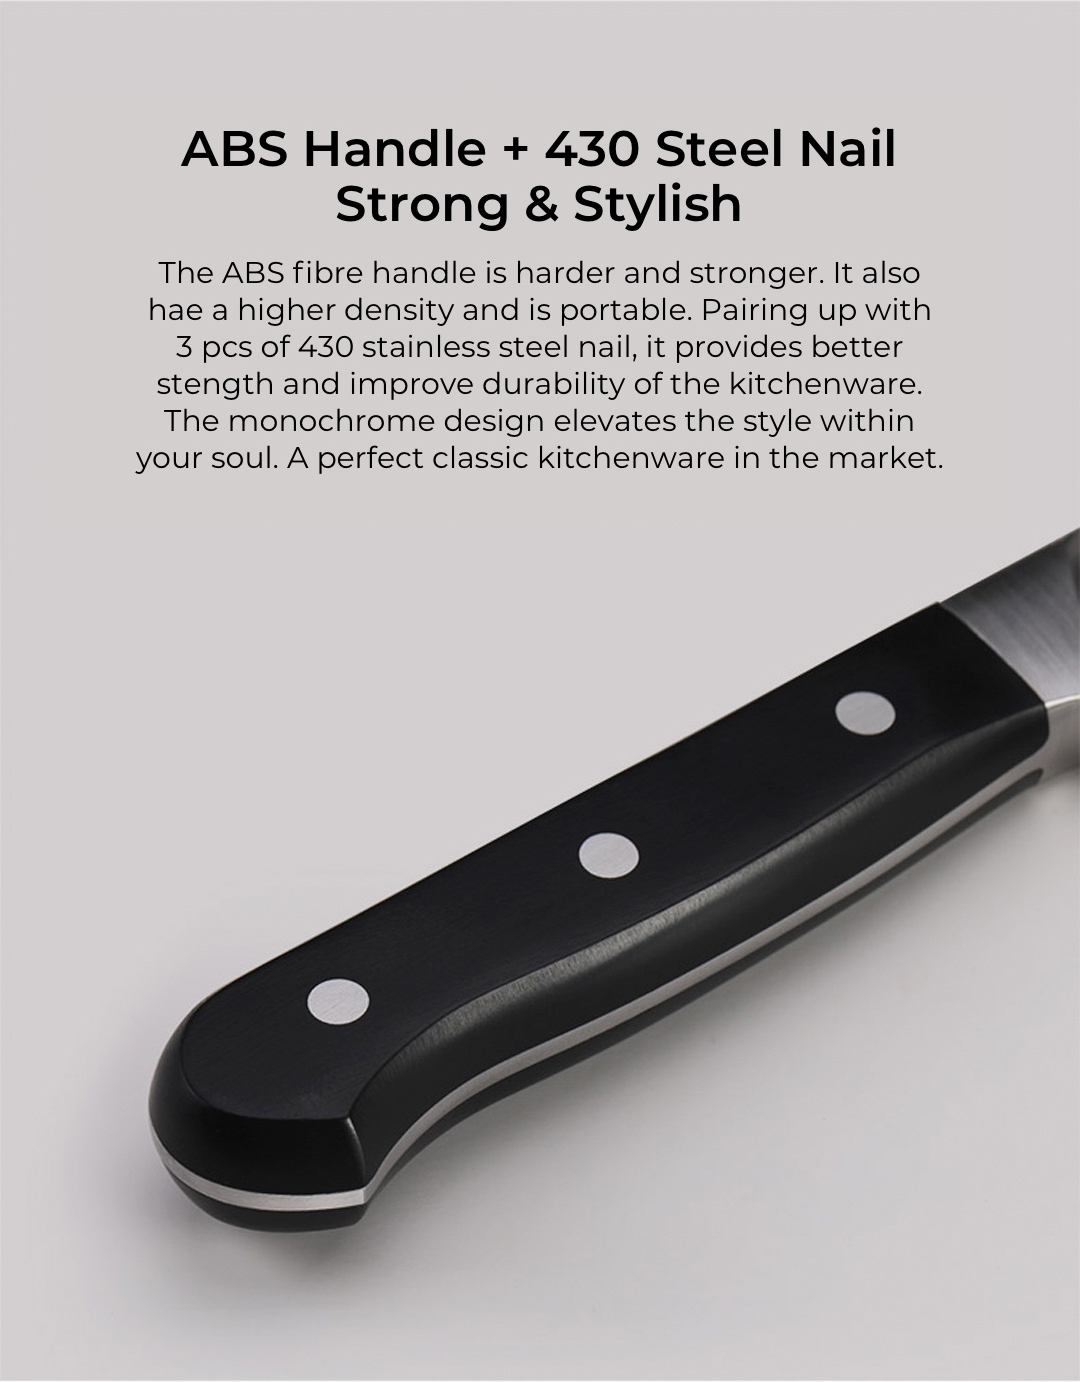 The ABS fiber handle is harder and stronger. It also have a higher density and is portable. Pairing up with 3 pcs of 430 stainless steel nail, it provides better strength and improve durability of the kitchenware. The monochrome design elevates the style within your soul. A perfect classic kitchenware in the market.